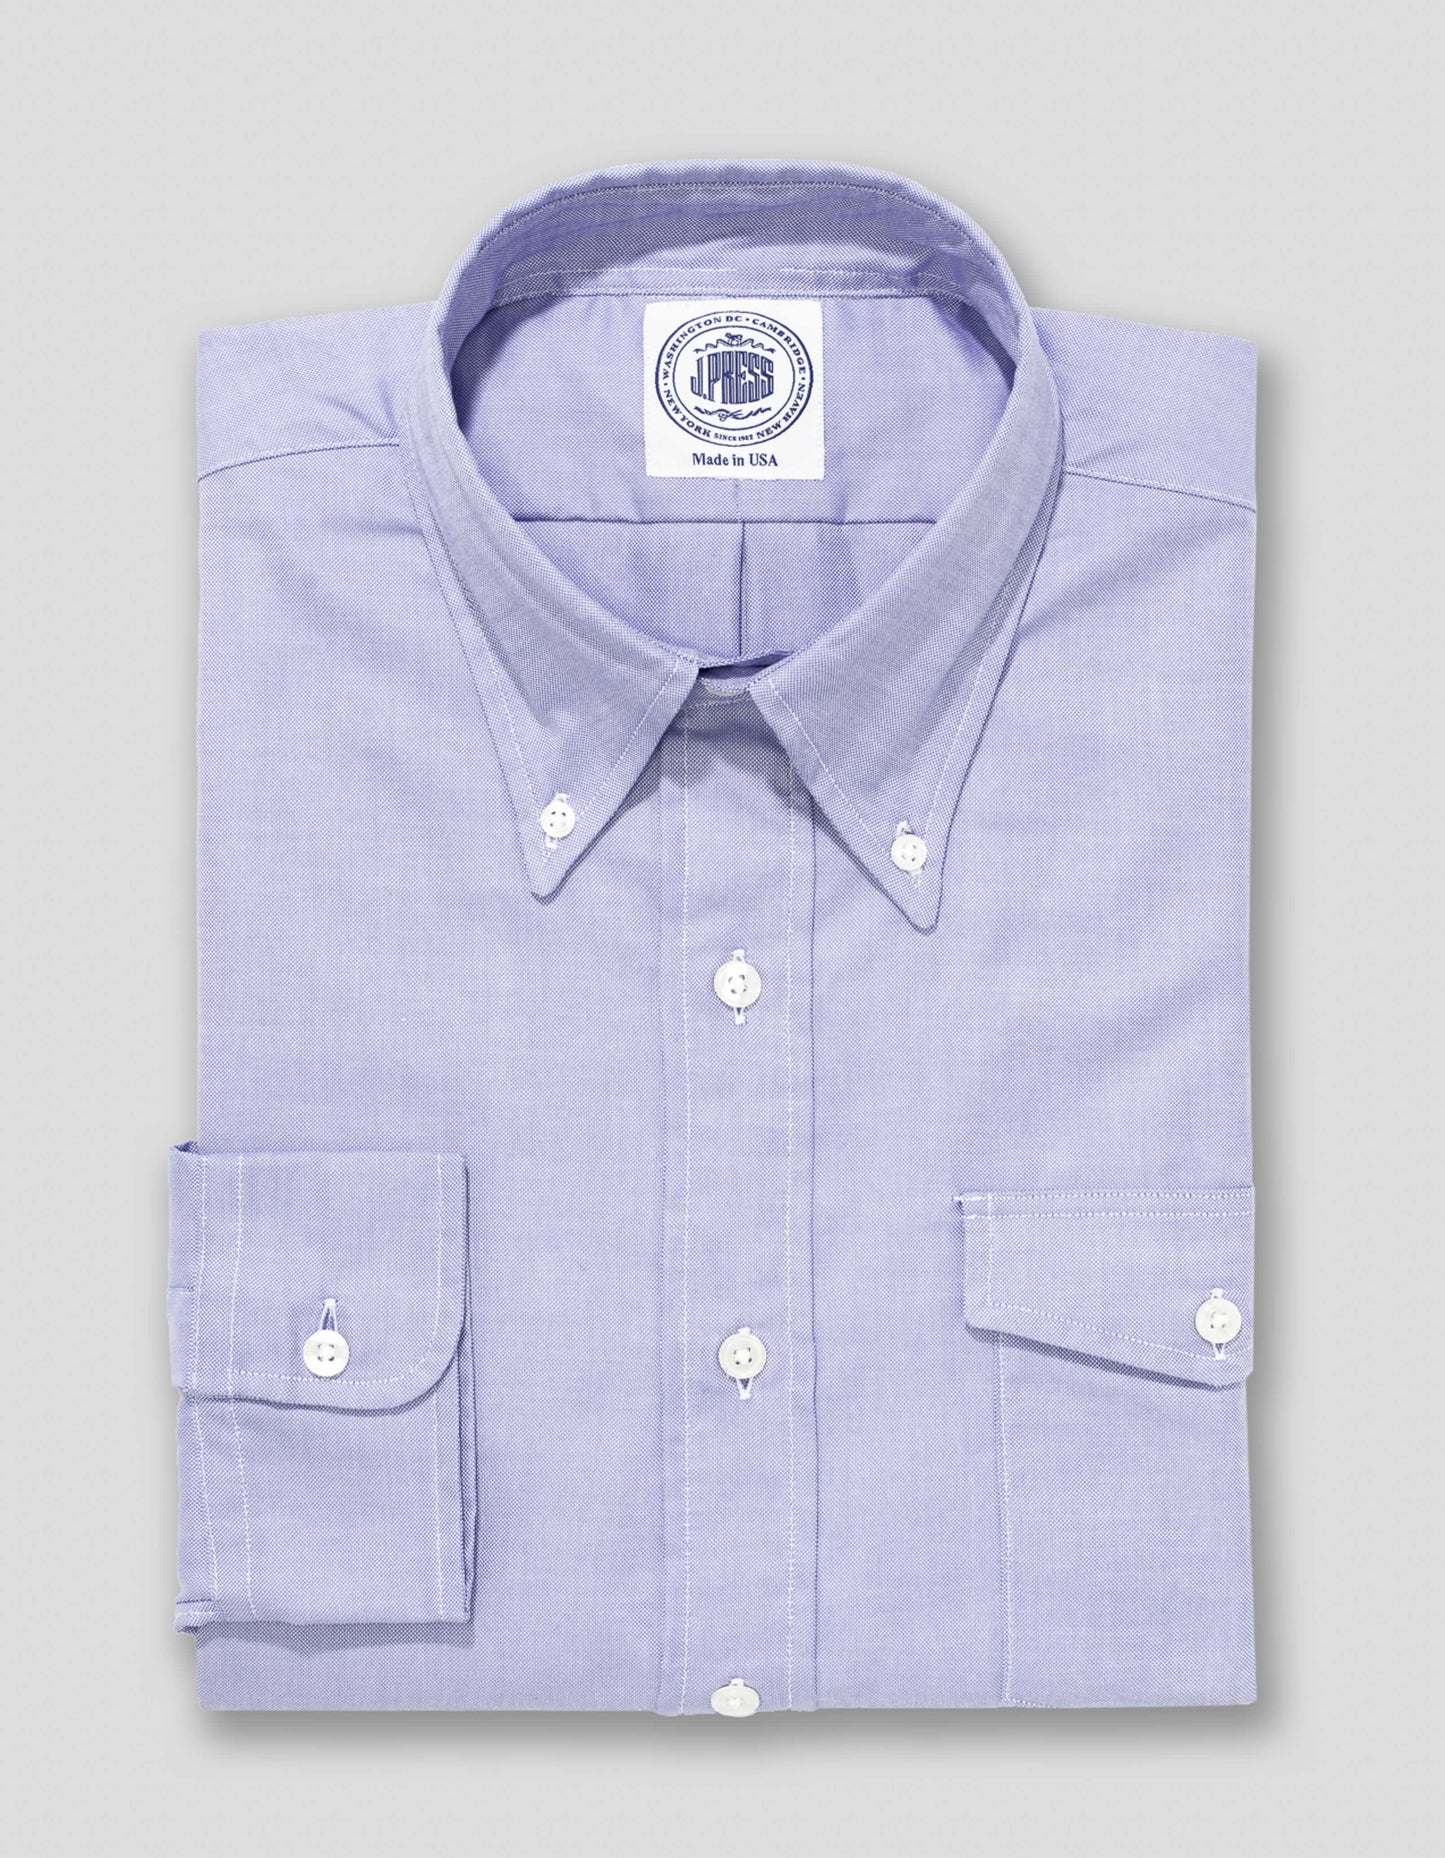 BLUE ROYAL OXFORD DRESS SHIRT WITH FLAP POCKET - CLASSIC FIT